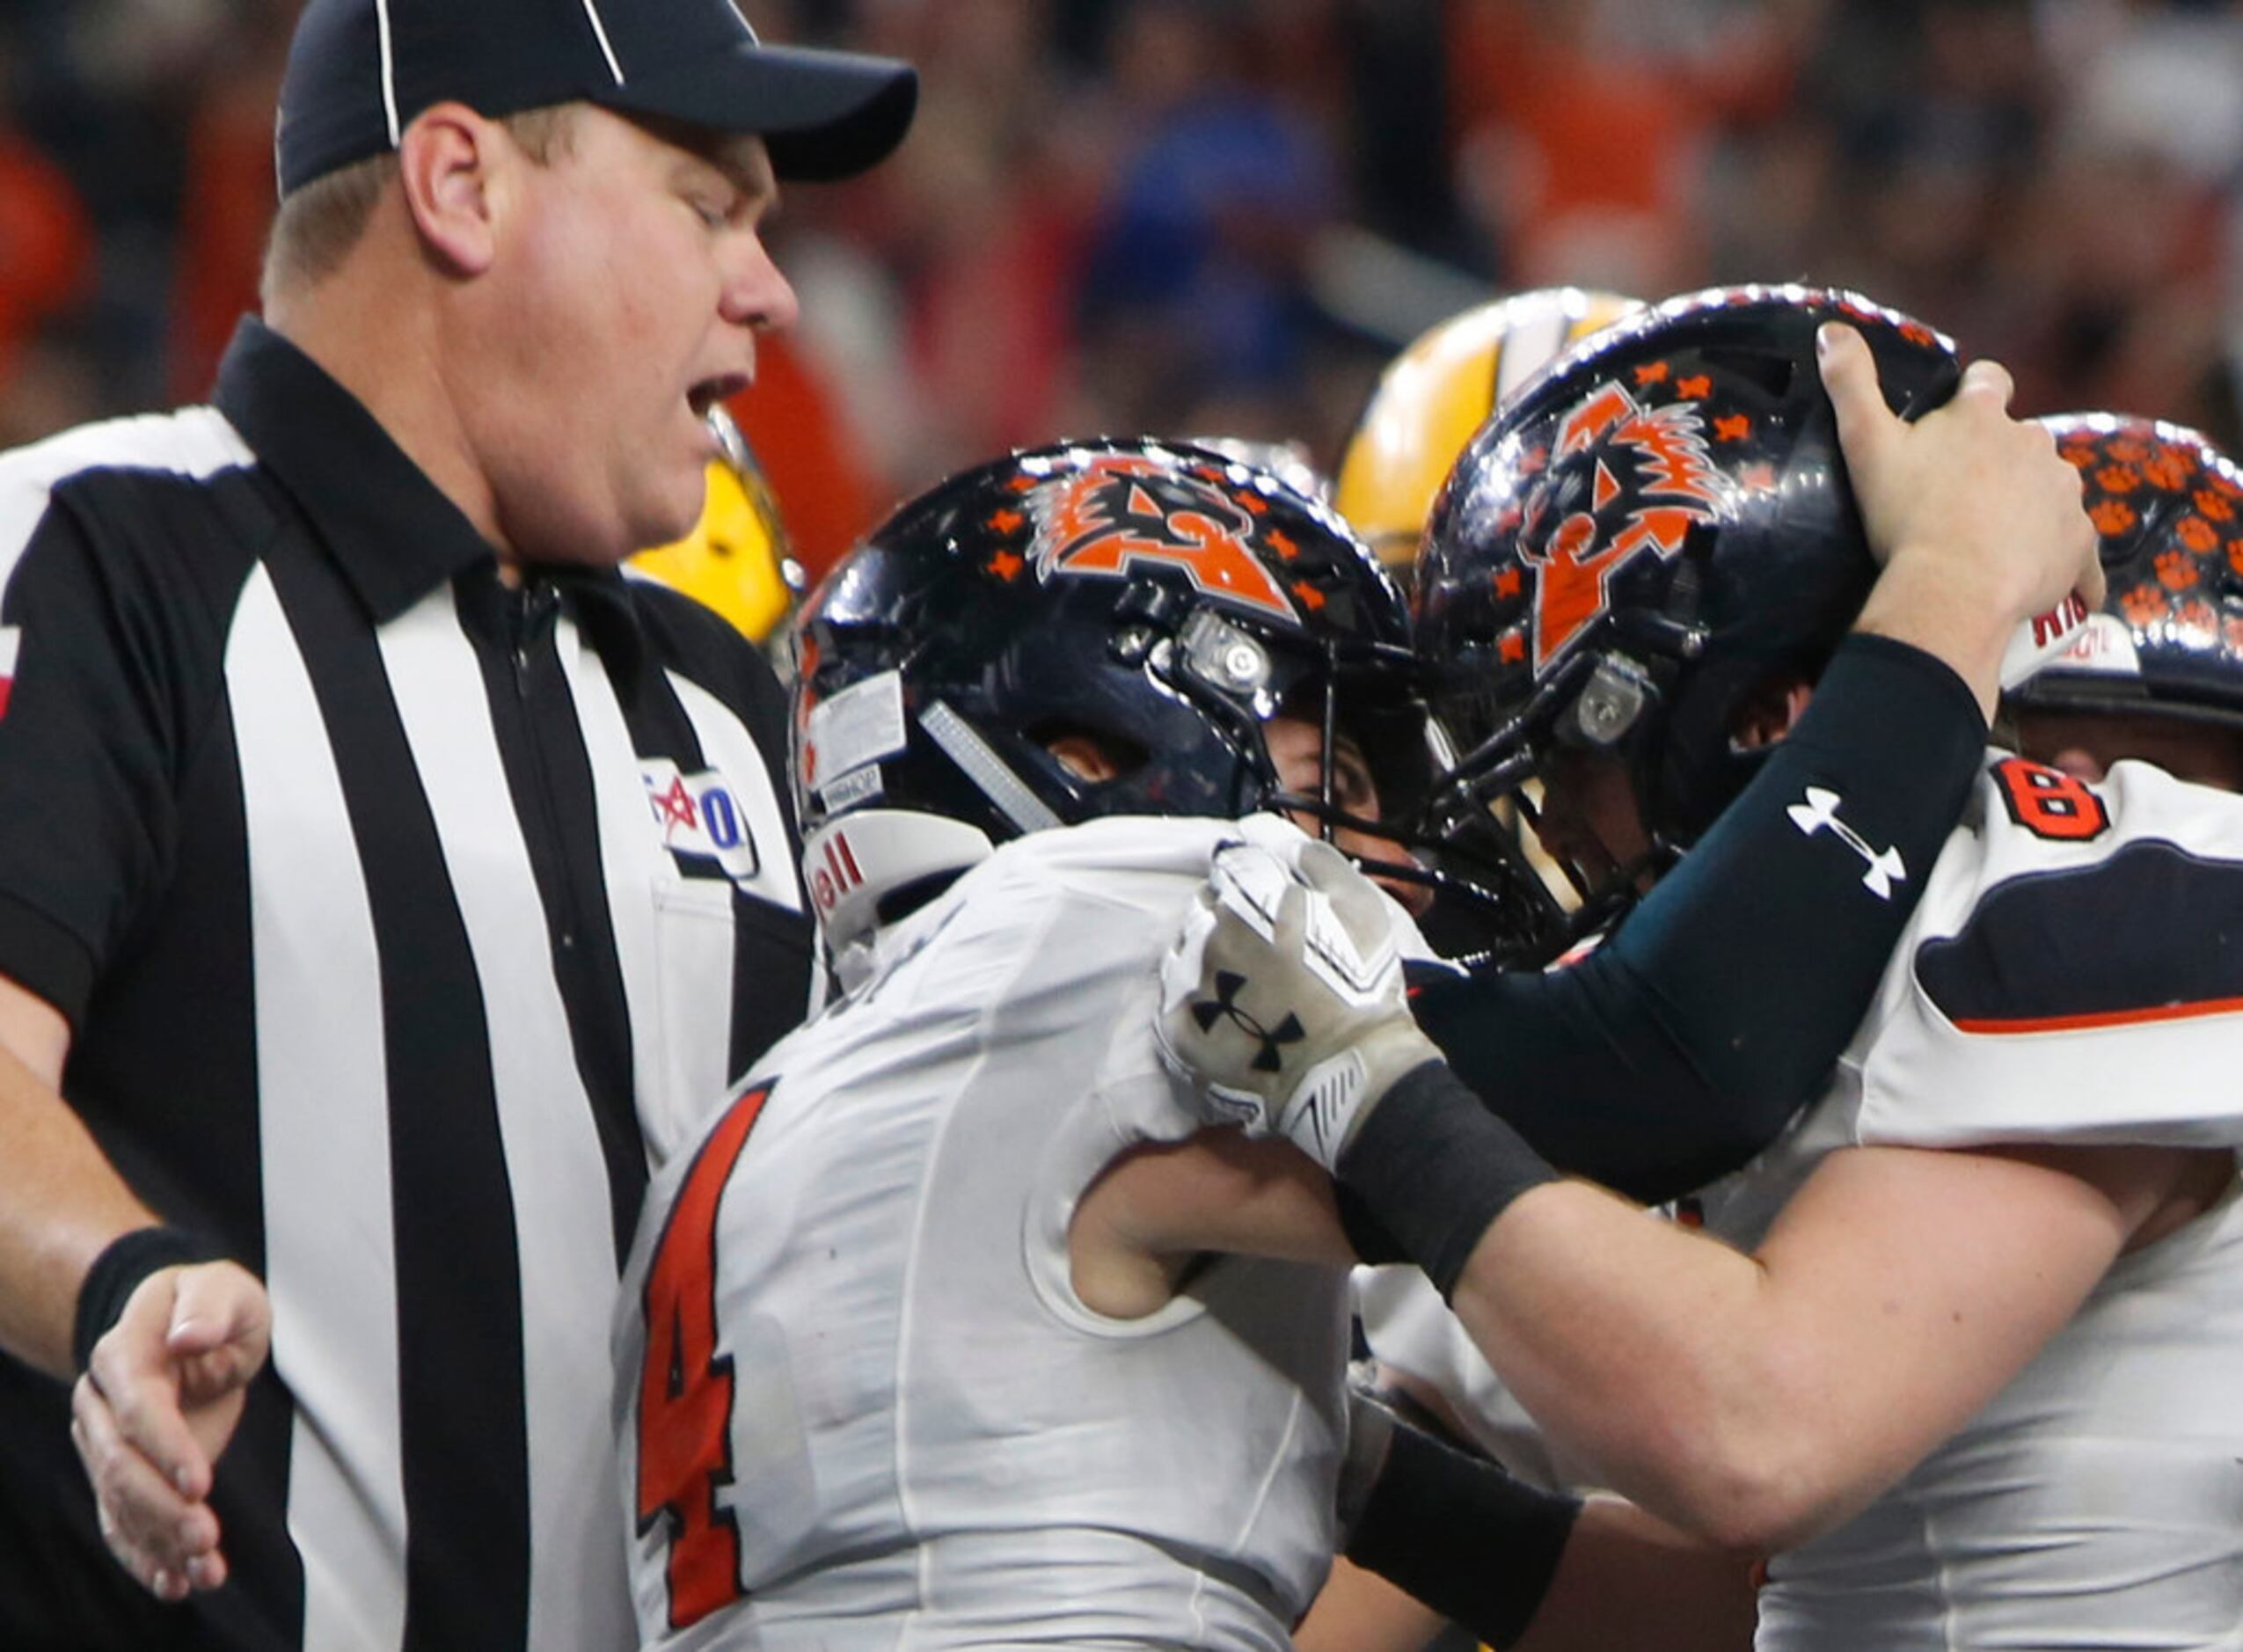 A game official is quick to move in and stop a spontaneous celebration between Aledo...